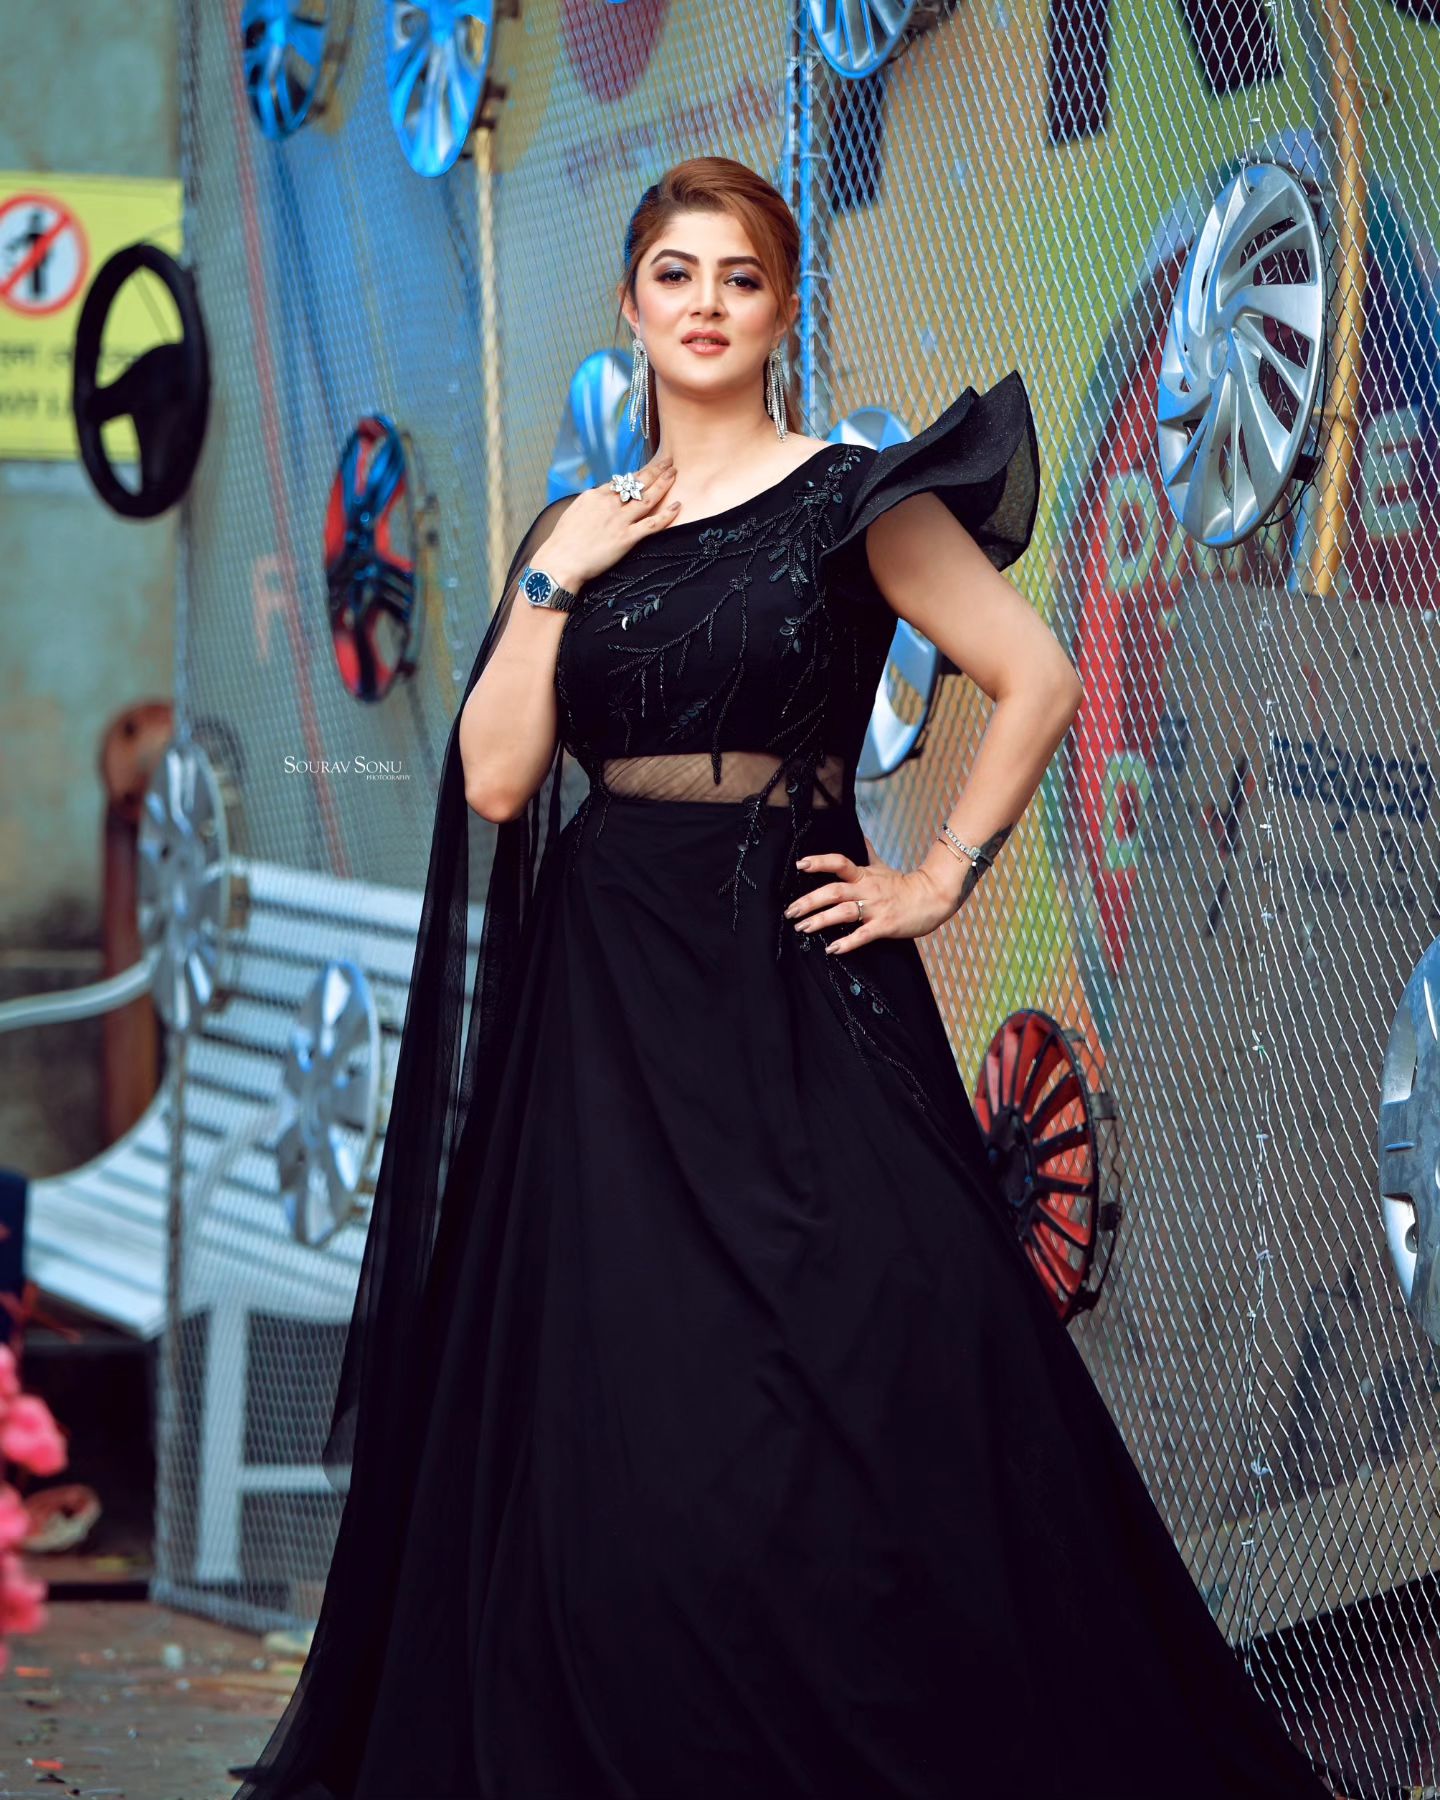 Srabanti-Chatterjee-shares-some-glam-and-stunning-photos-See-the-pictures-05-Bengalplanet.com